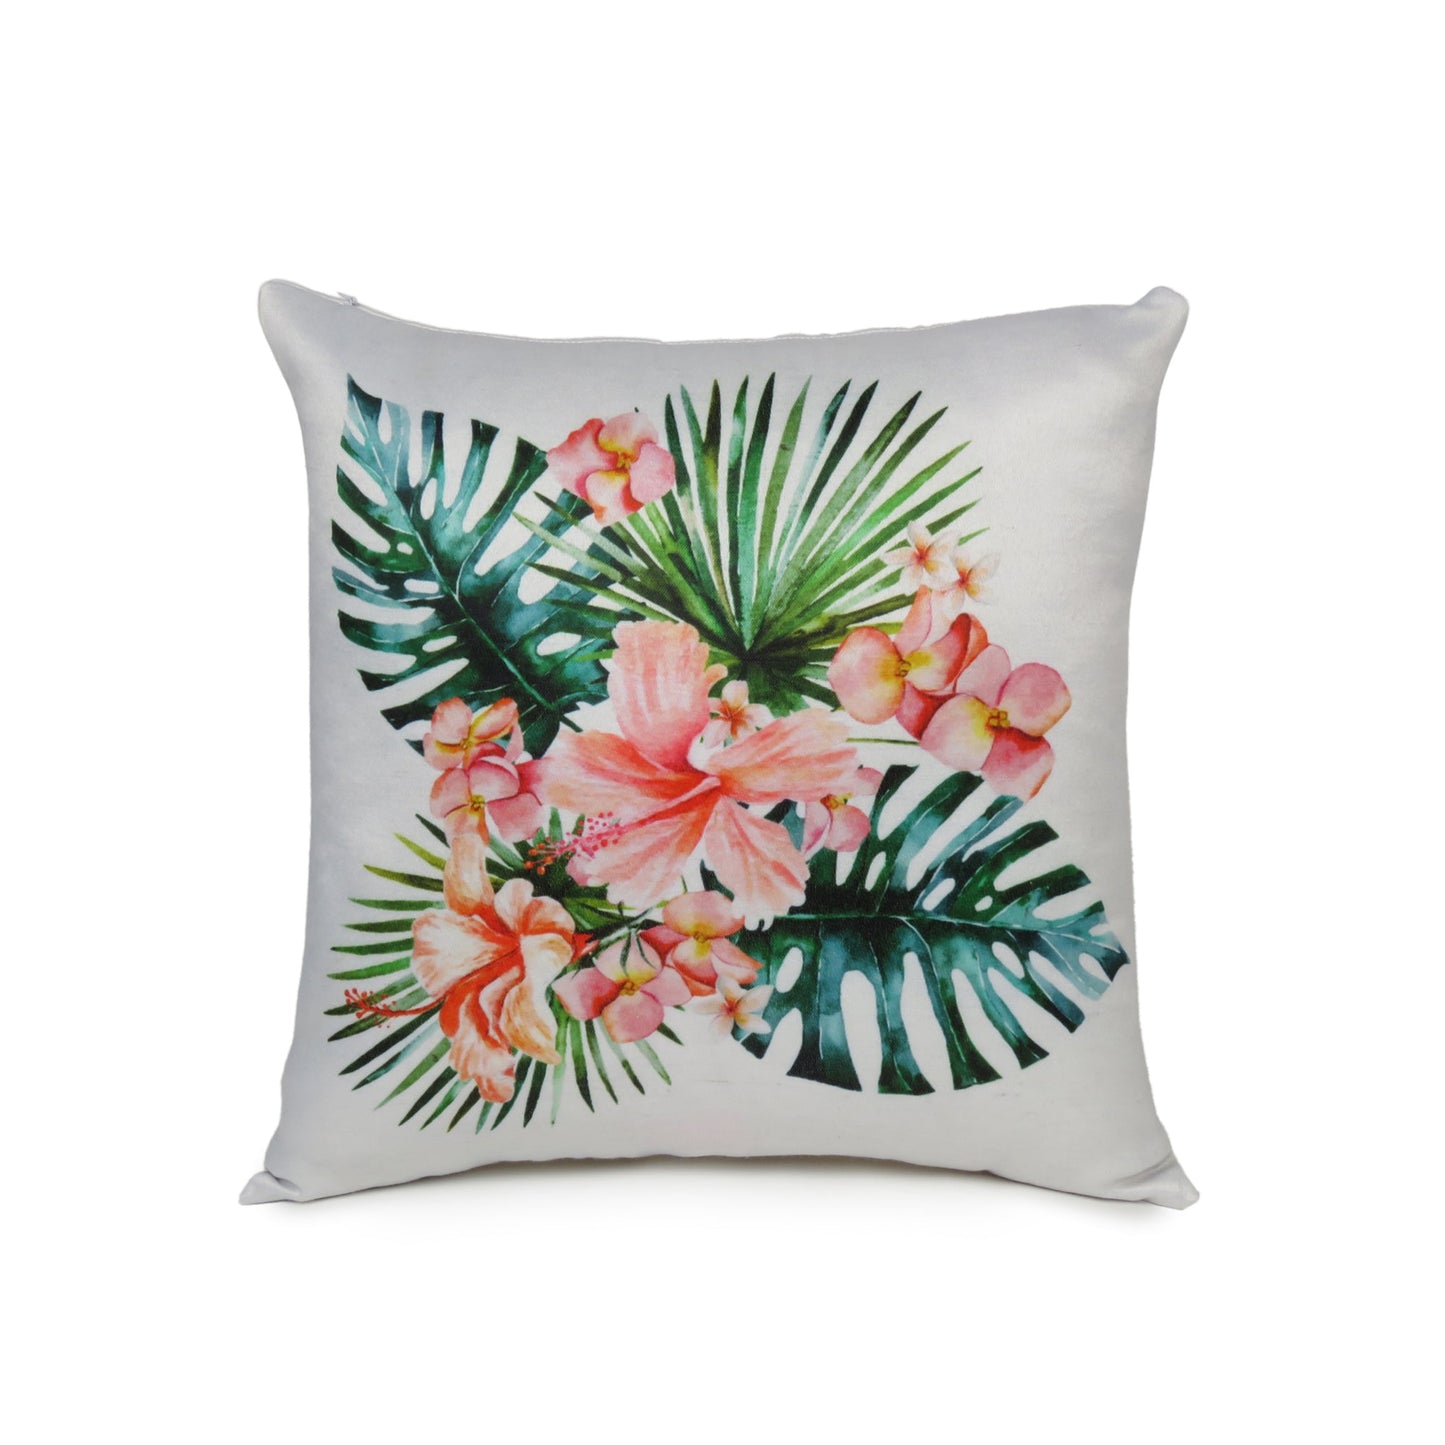 Multicolor Tropical Leaf & Floral Printed Cushion Cover in Set of 2